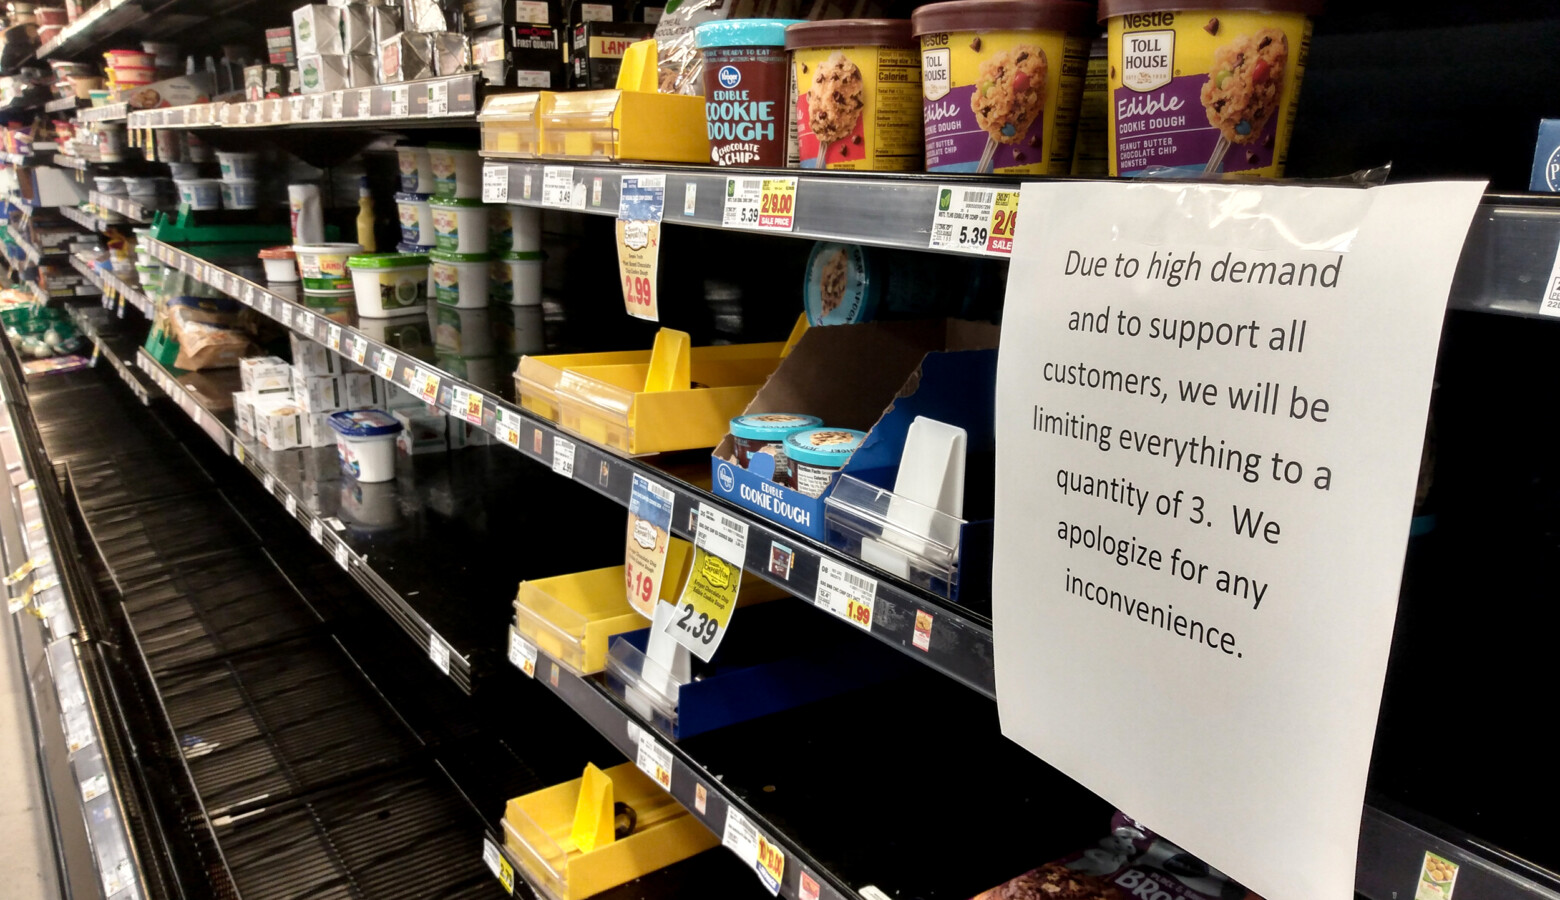 A number of grocery chains, including Kroger, are implementing restrictions on the number of products customers can purchase. (Lauren Chapman/IPB News)